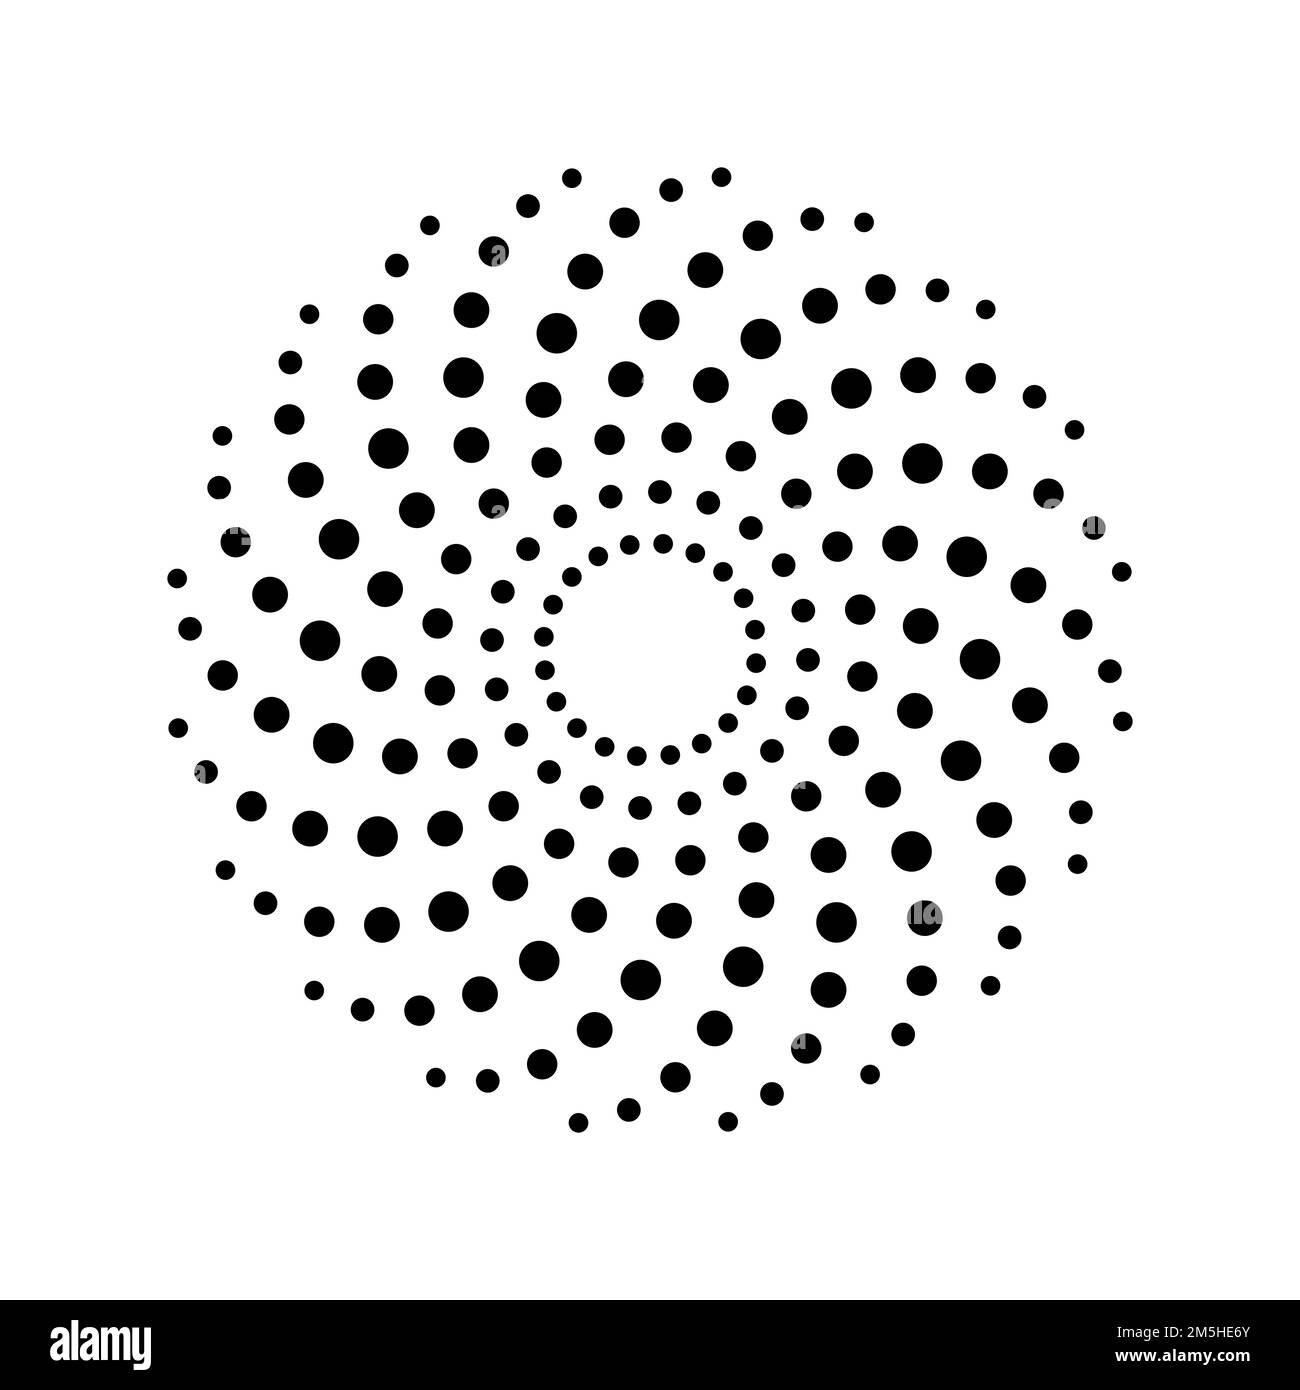 Halftone circle made of spiral dots. Simple black halftone logo on white background. Swirl pattern rotation. Abstract whirlpool round shape. Vector Stock Vector